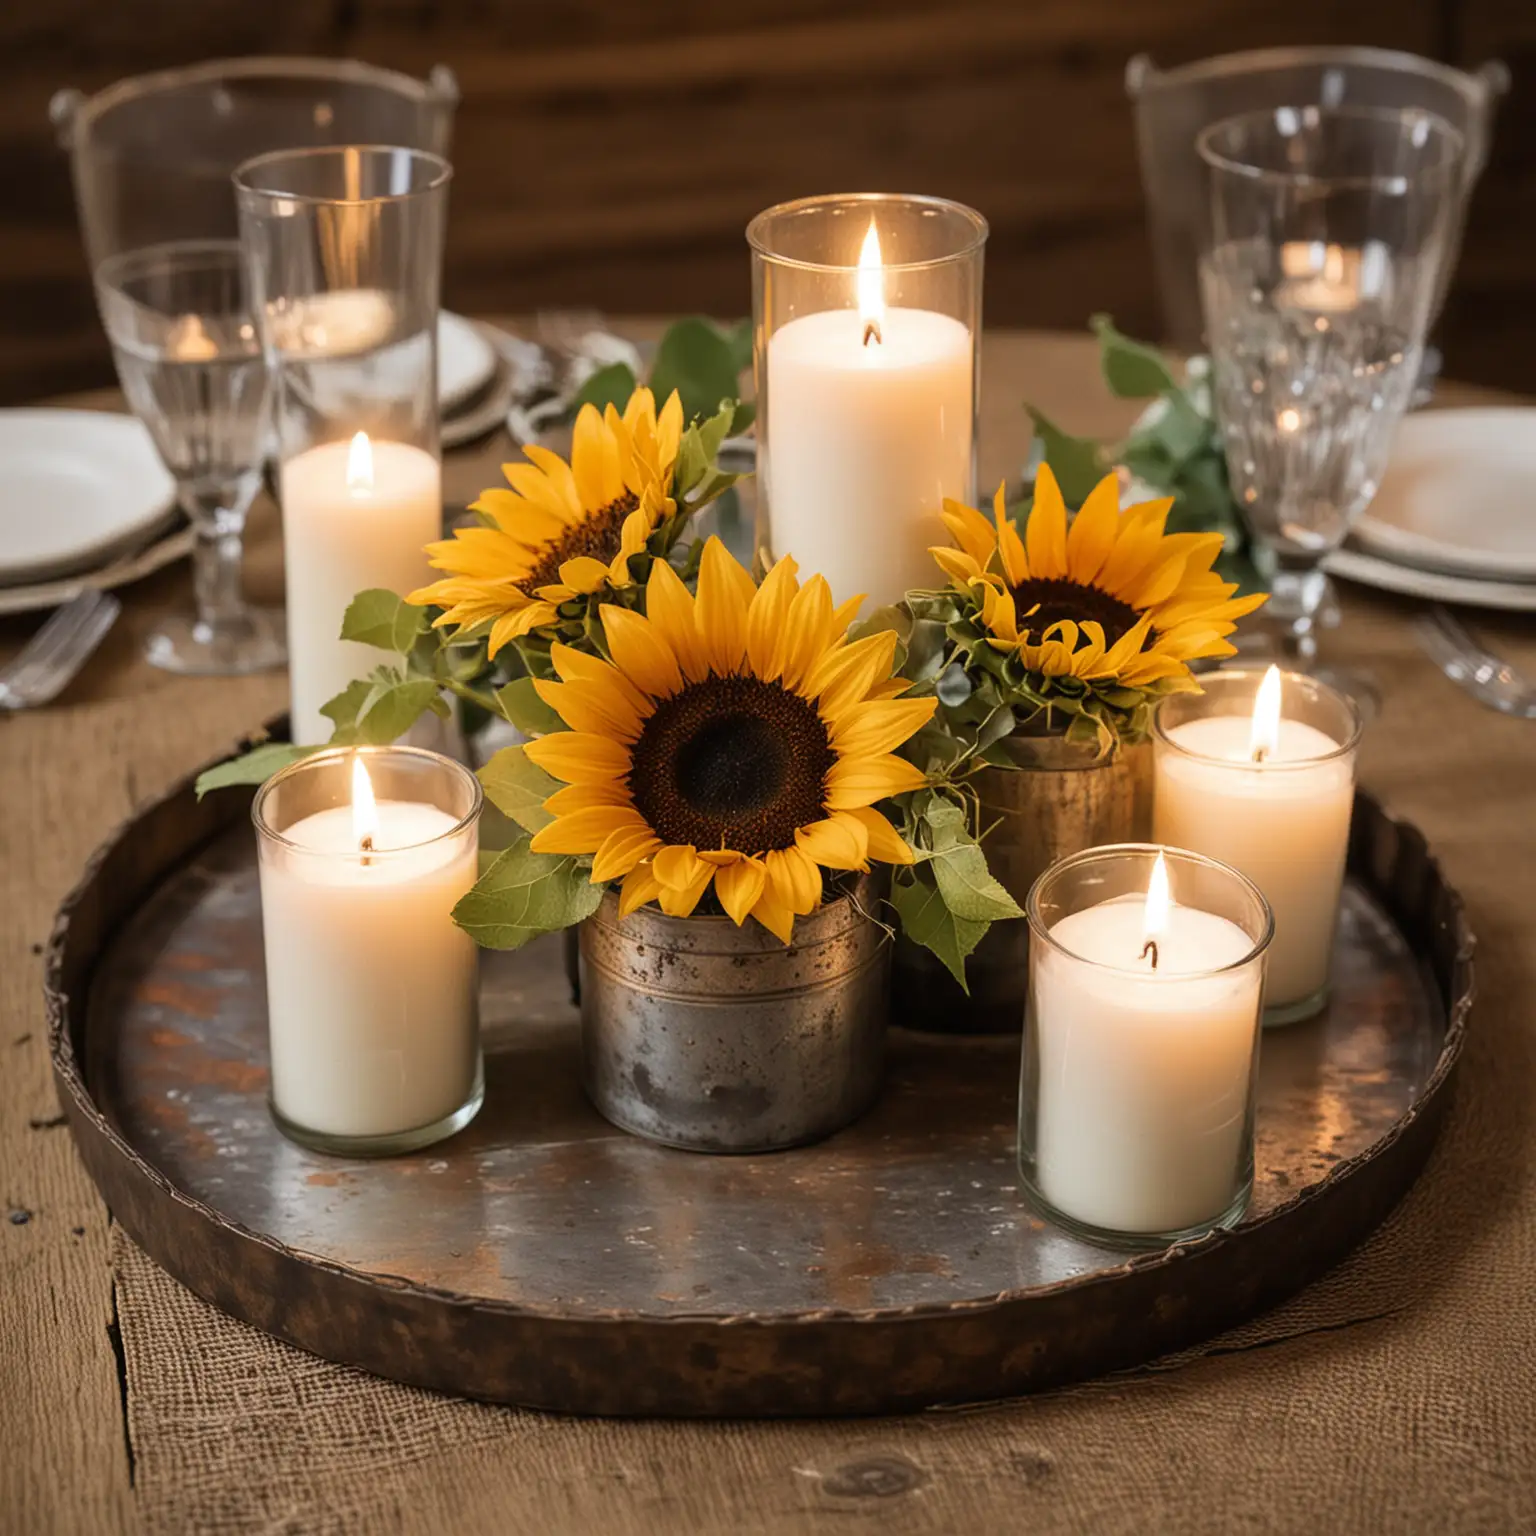 a rustic wedding centerpiece using a rustic and old small round metal tray that is about 6" in diameter and looks very worn, with sunflower blossoms without stems on top and surrounding votive candles